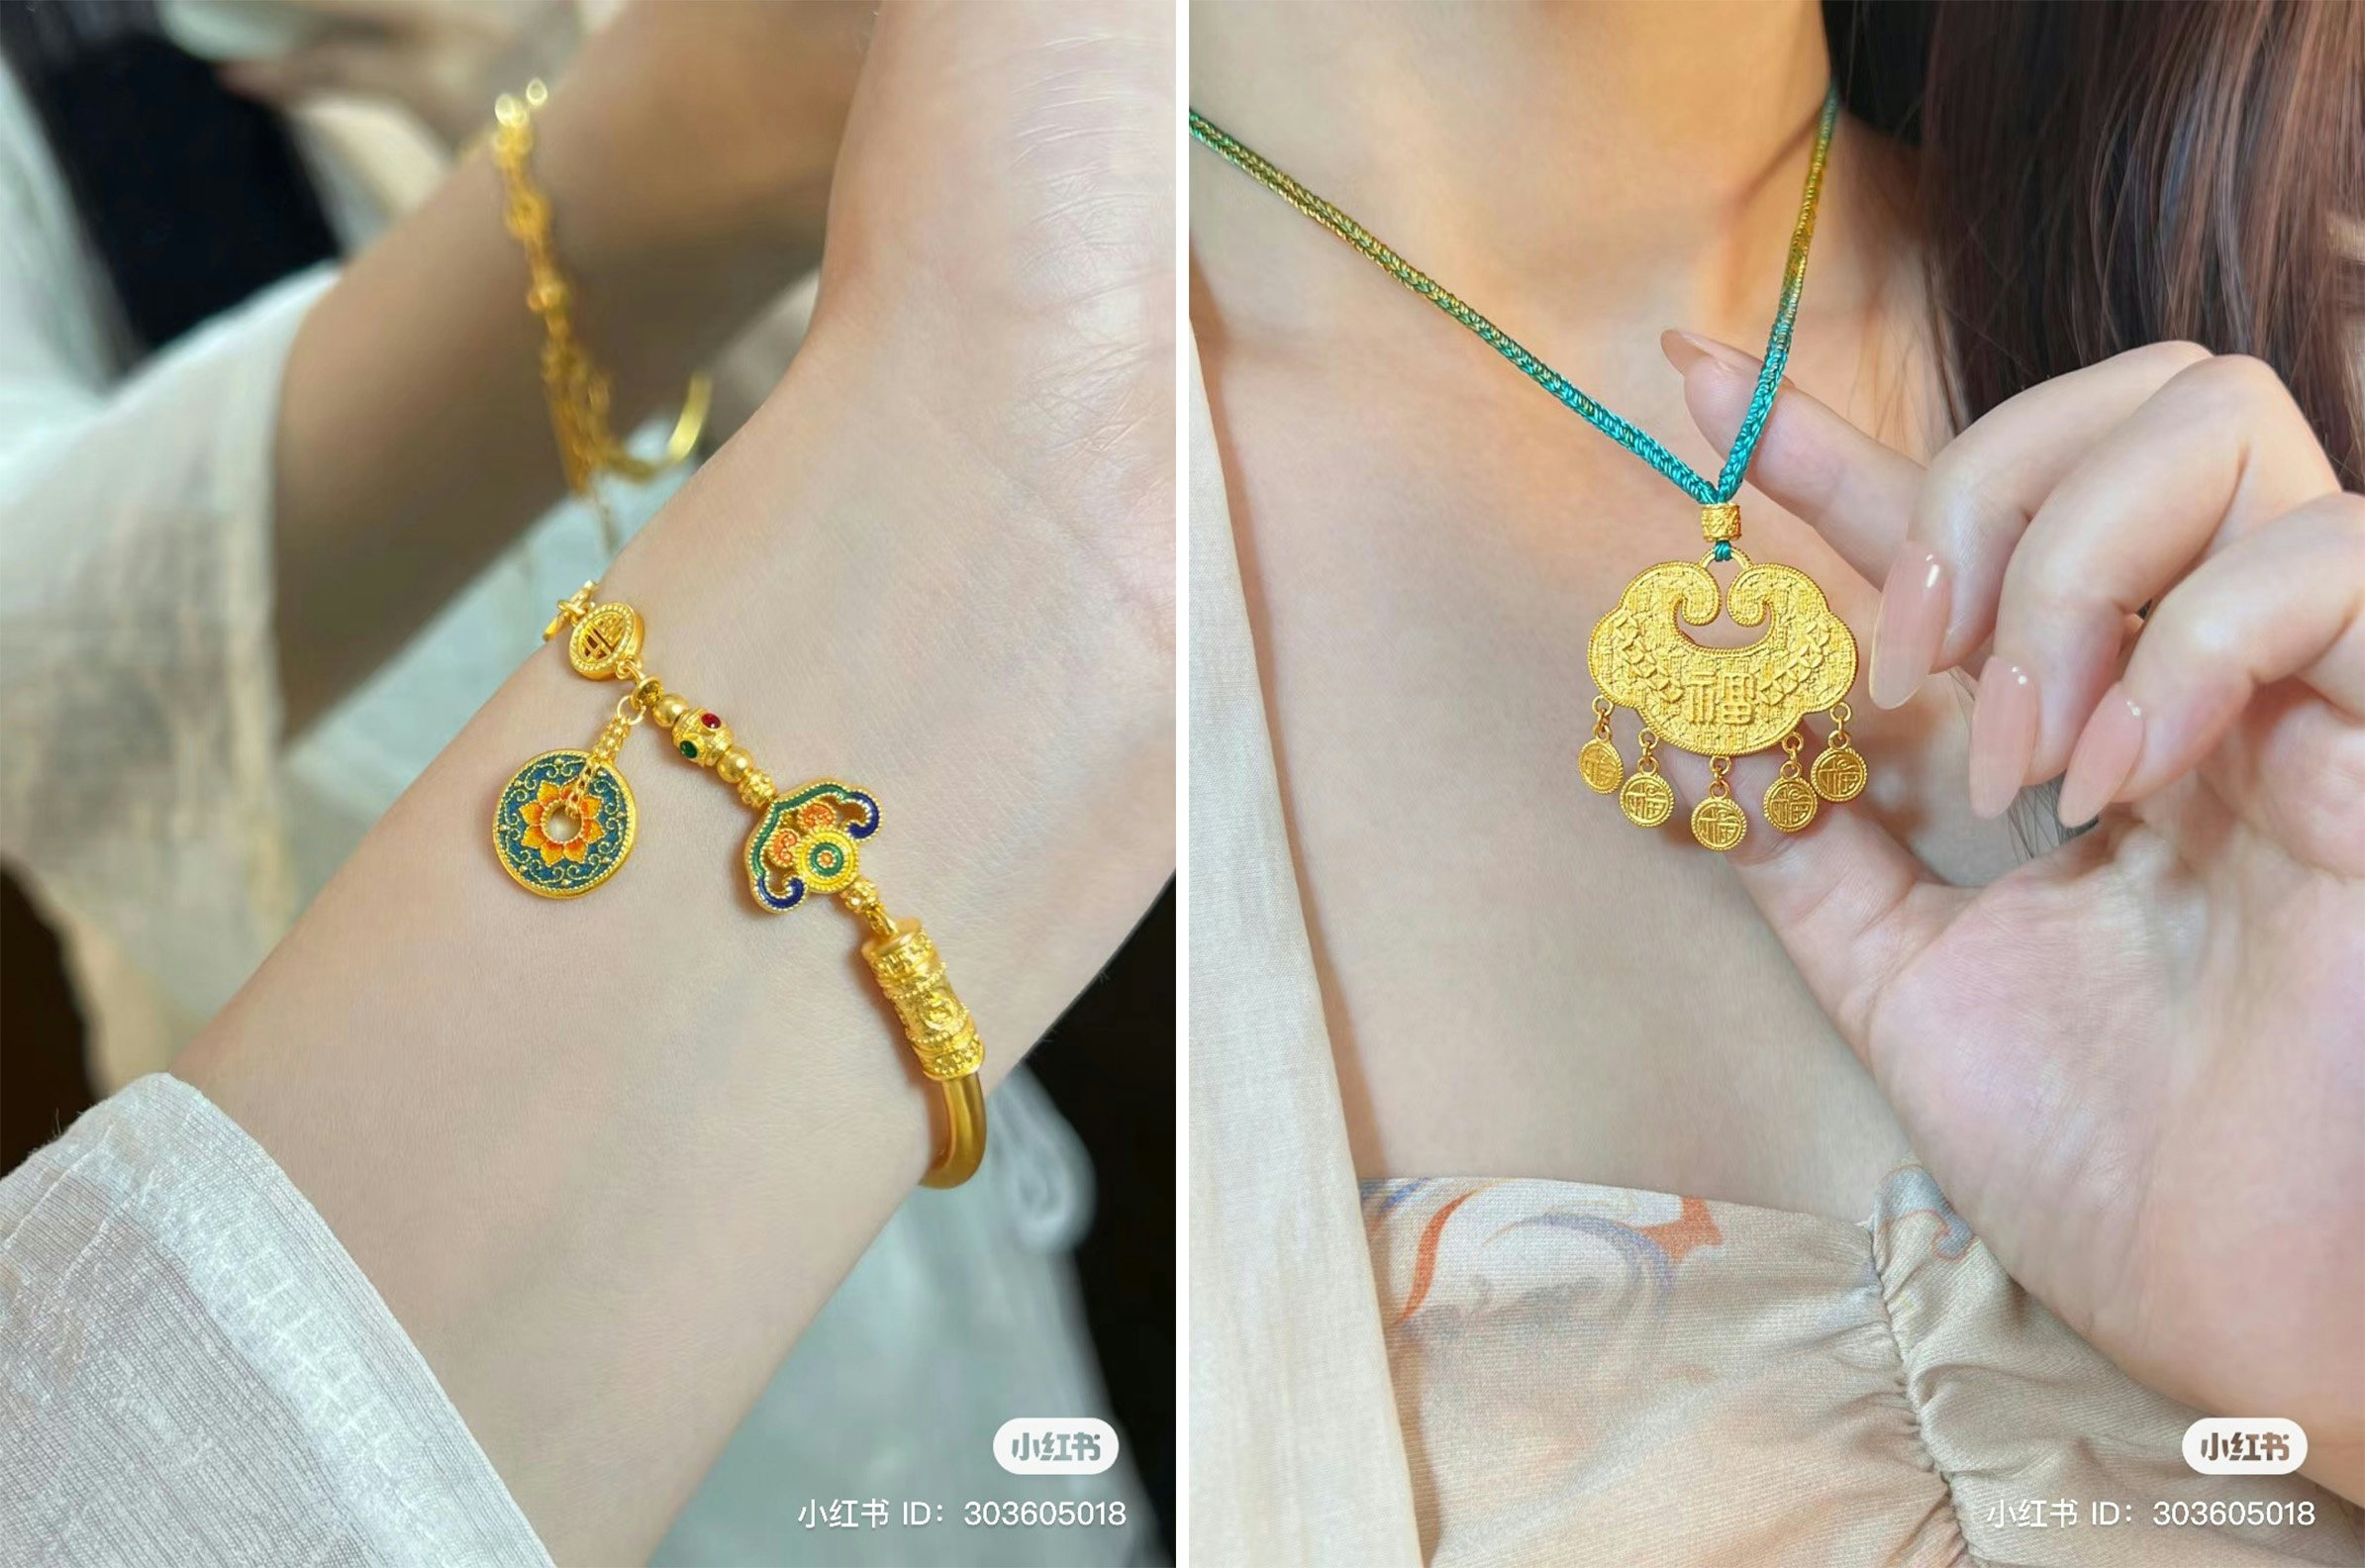 Chinese Gen Z consumers want jewelry pieces infused with Chinese cultural elements, Chow Tai Fook finds. Photo: Xiaohongshu